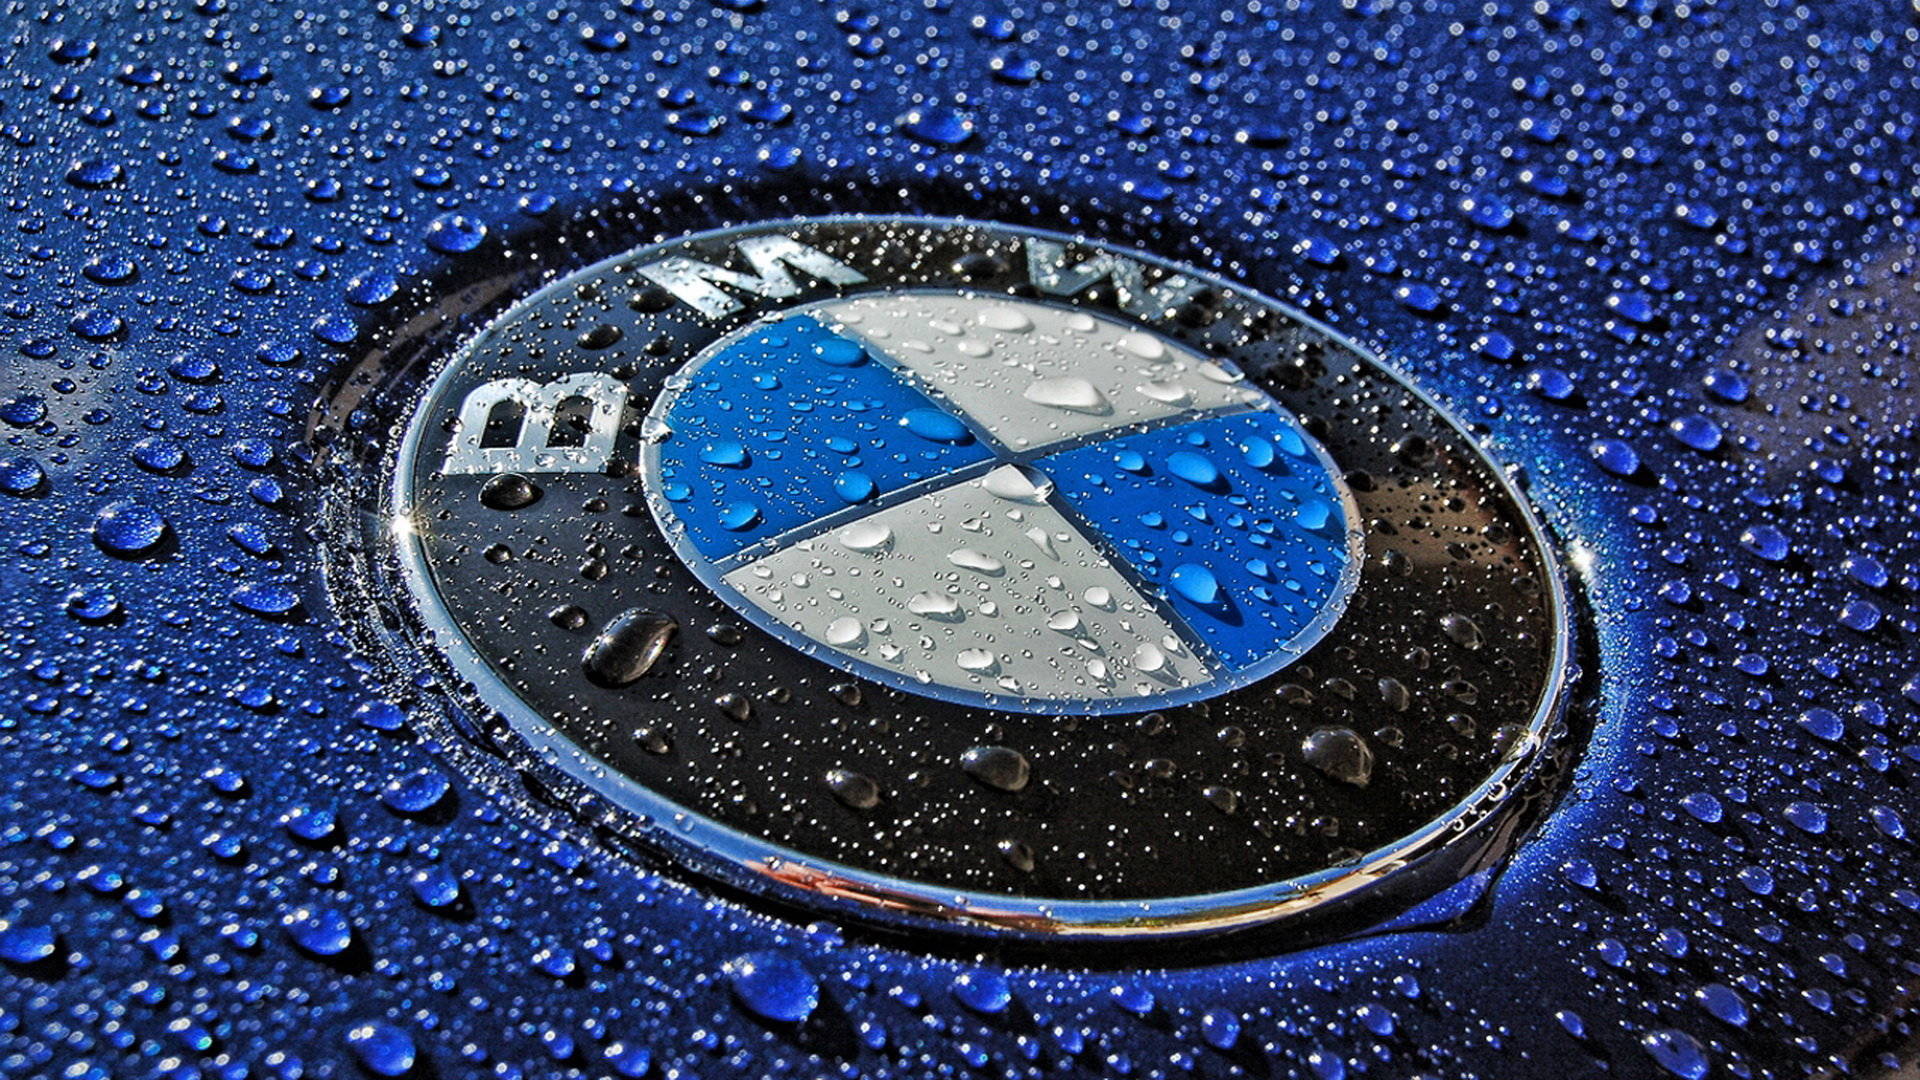 BMW`s Sales in November Keeps the First Place Worm, Mercedes-Benz Falls 13 Percent Behind